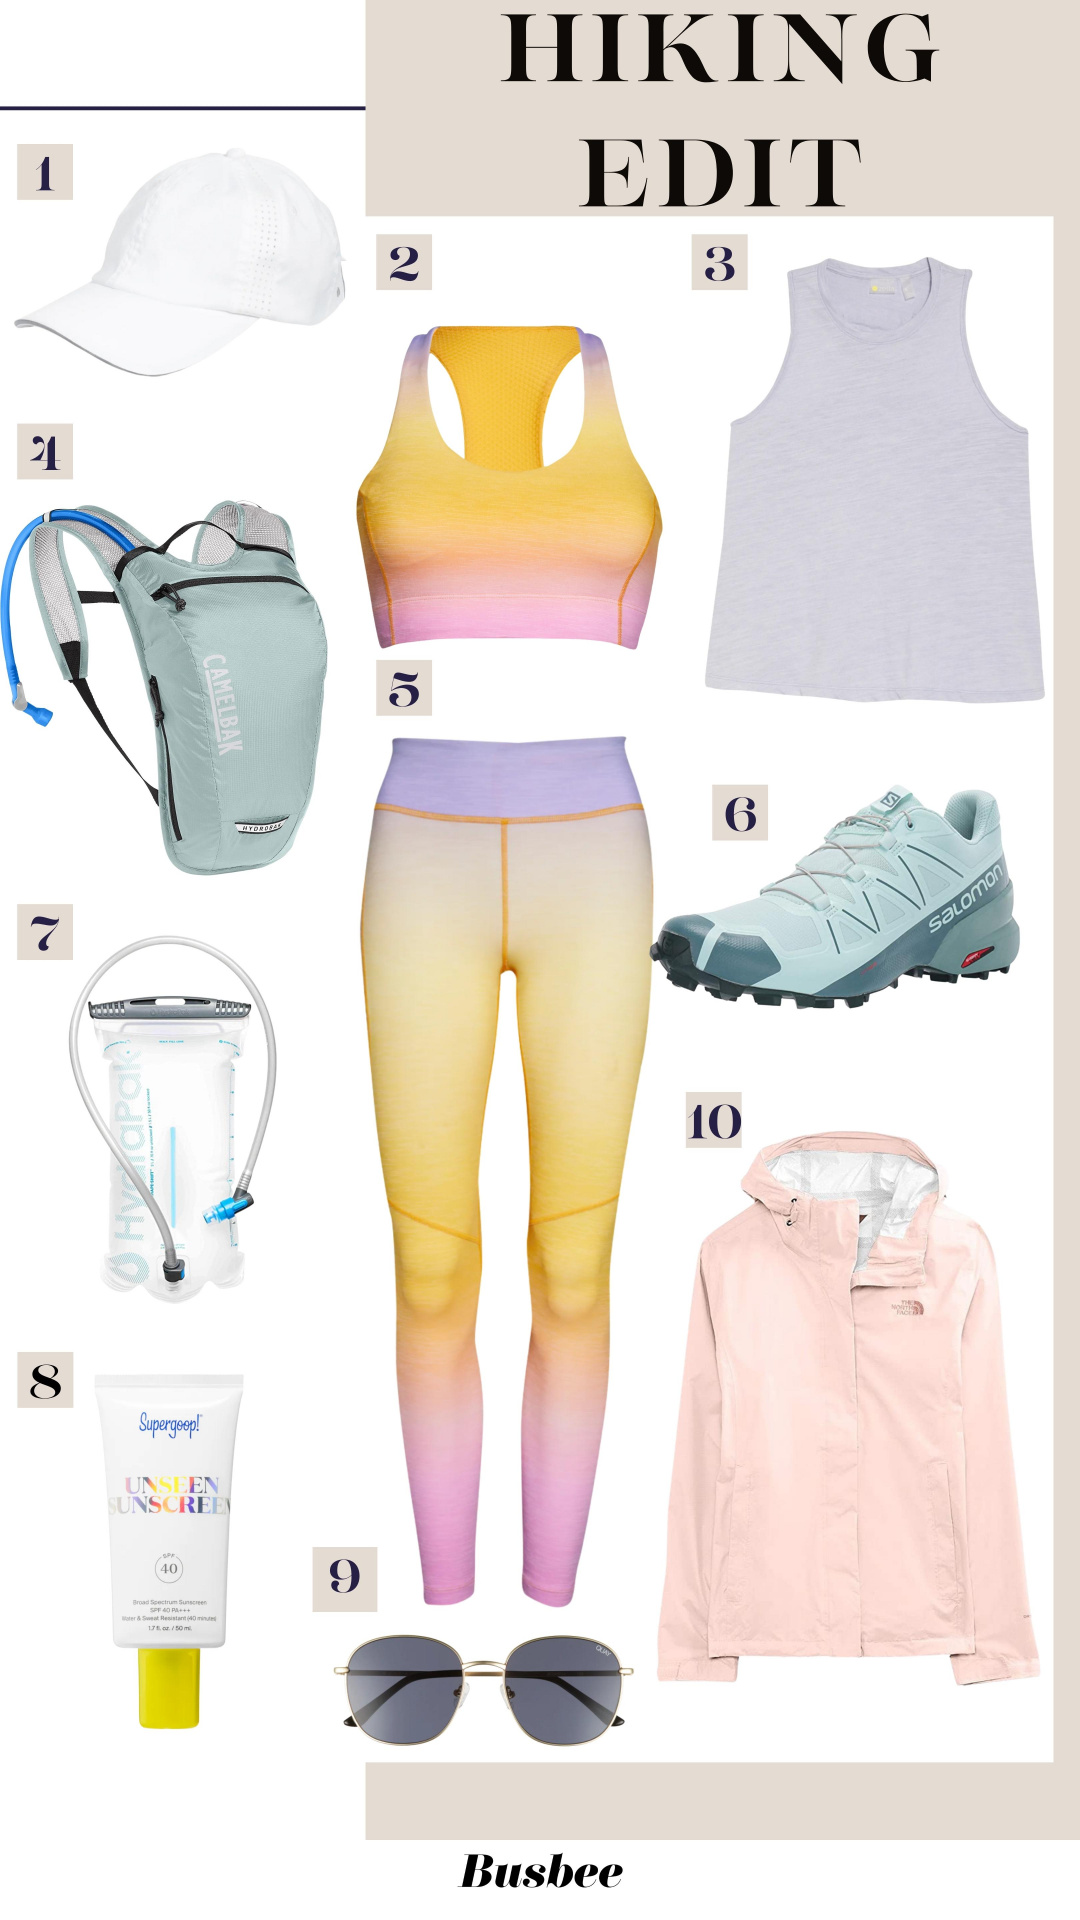 hiking essentials, what to wear hiking, how to dress hiking, womens hiking outfits, salomon hiking shoes, best hiking shoes women, what to wear on a hike, hiking look, hiking outfit, best hiking outfit, hiking must-haves, outdoor voices ombre leggings and bra, camelbak hydration pack